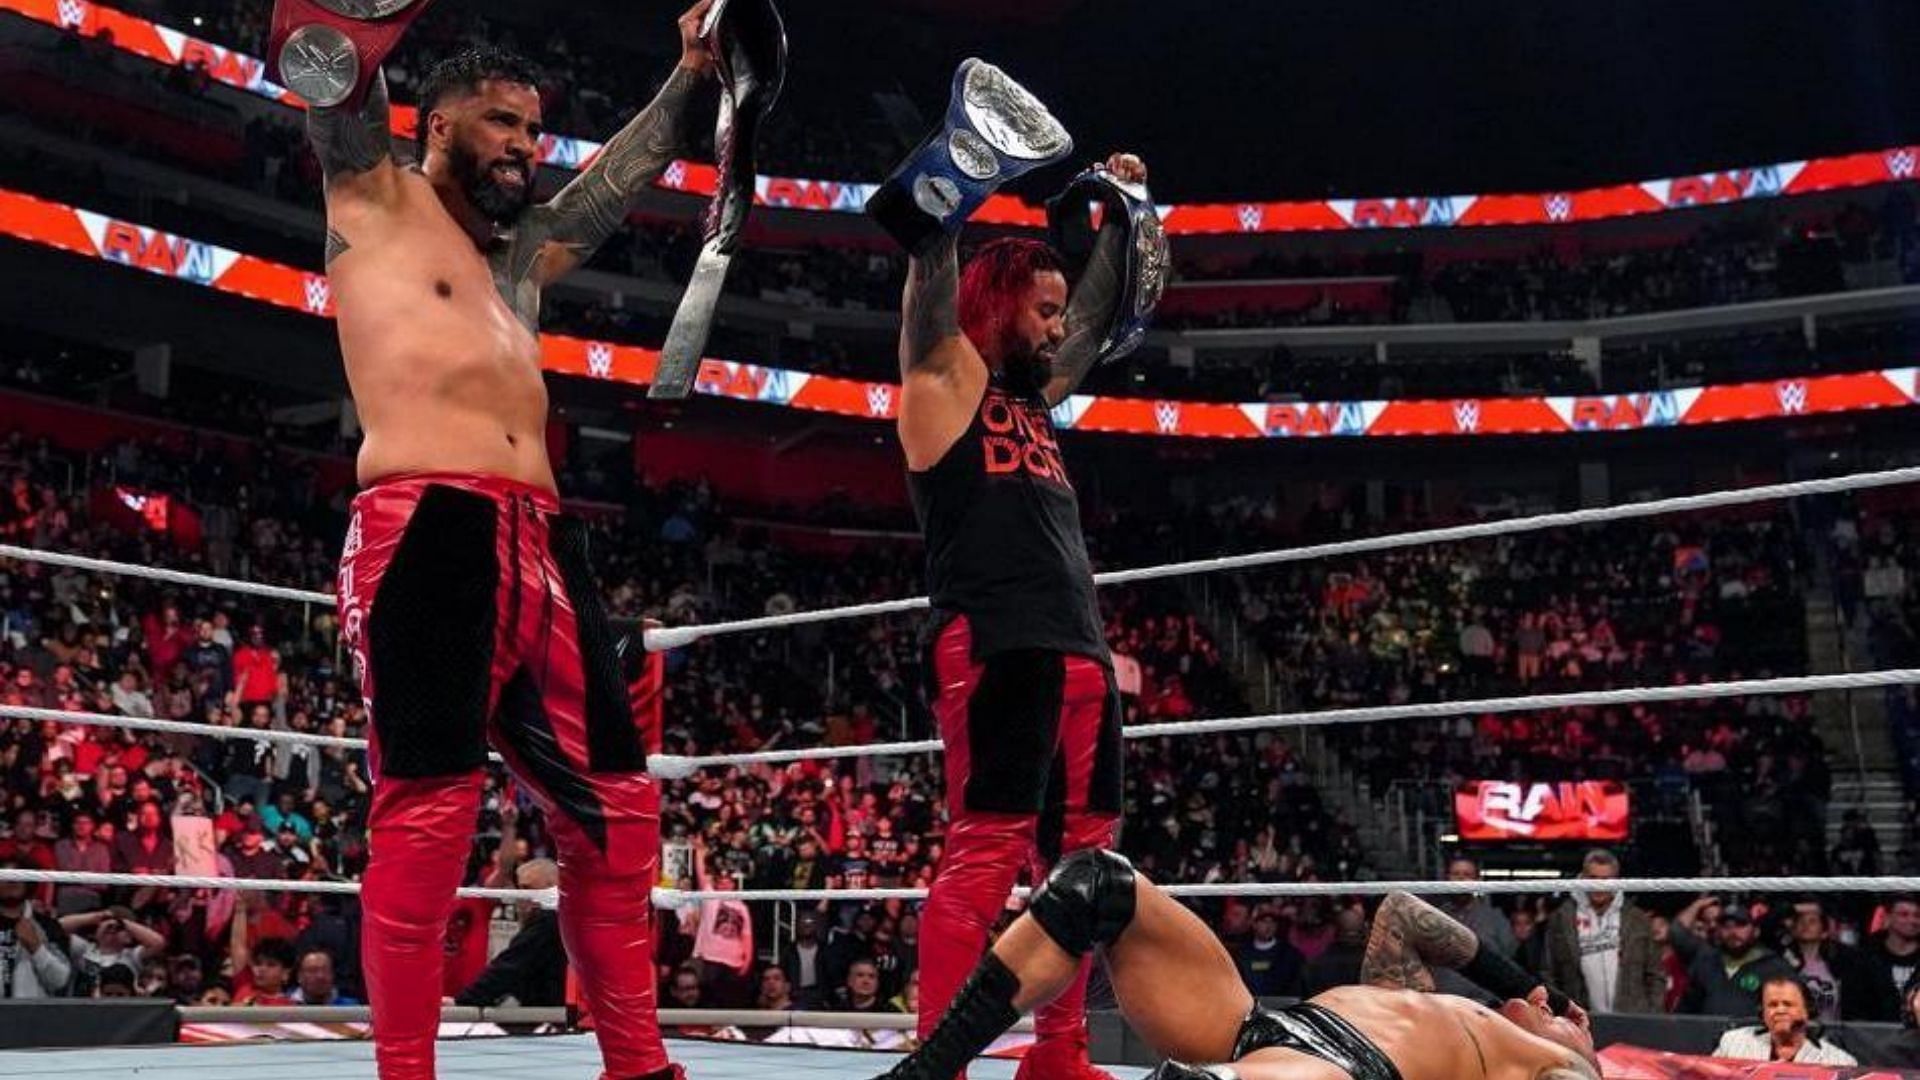 The Usos will aim to retain the Undisputed WWE Tag Team Championships at SummerSlam